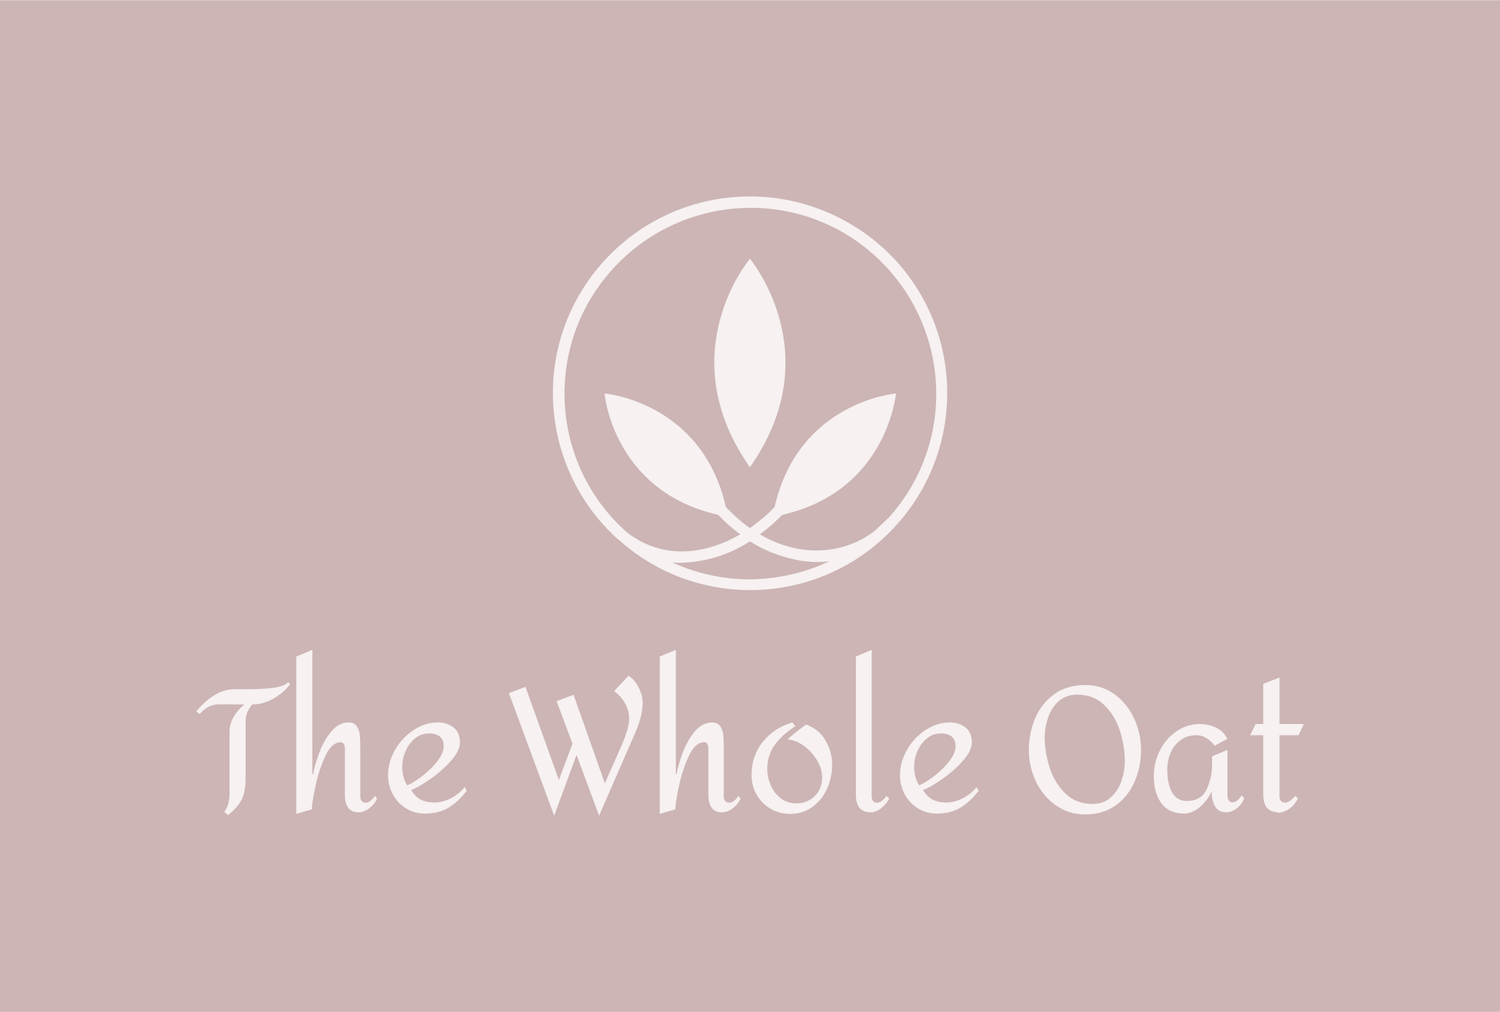 The Whole Oat